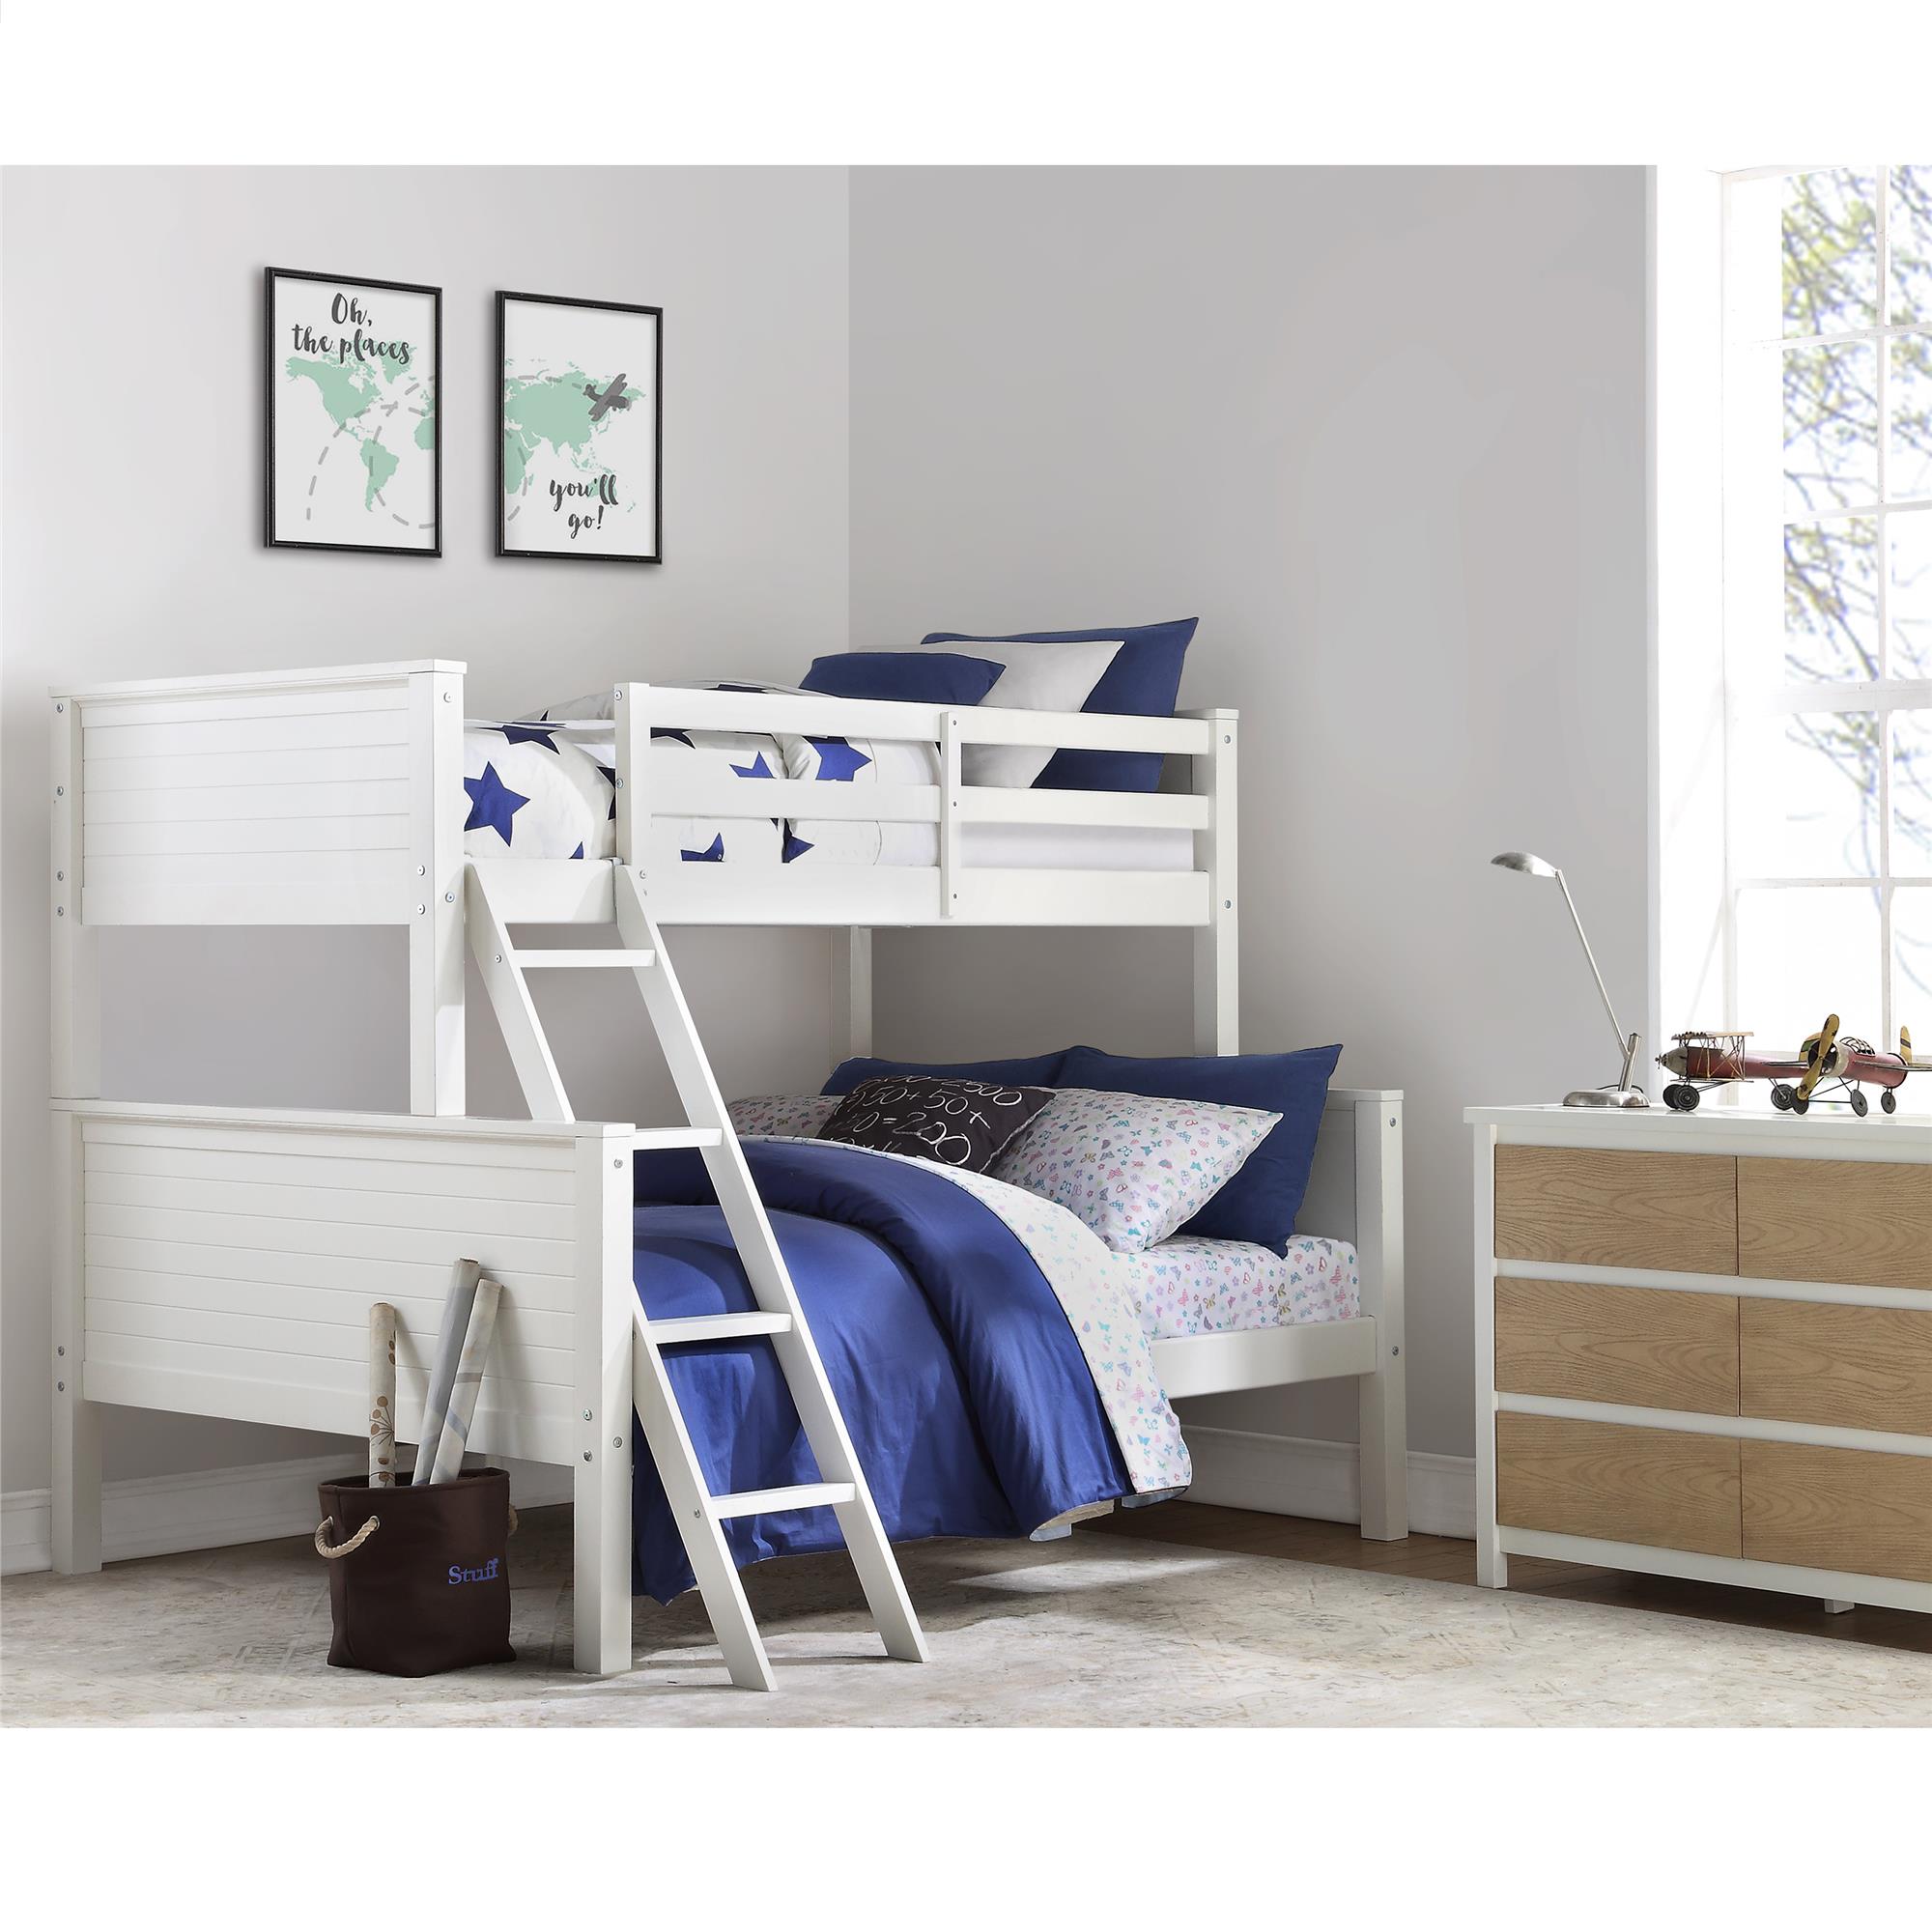 Mainstays Premium Twin Over Full Bunk Bed, Mainstays Premium Twin Over Full Bunk Bed White